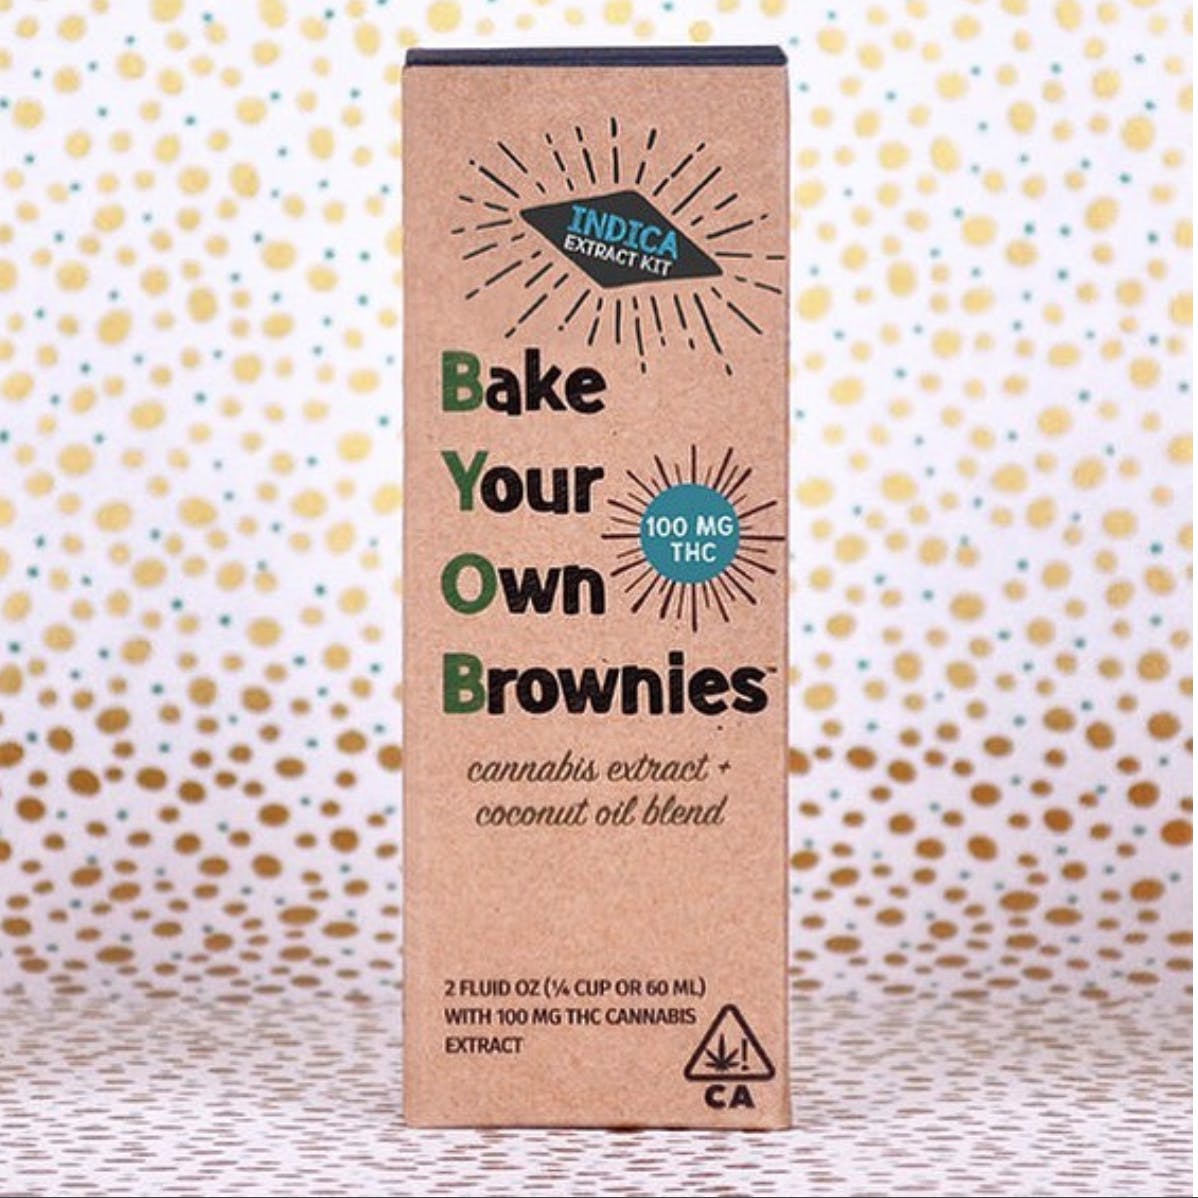 Bake Your Own Brownies -indica extract kit 100mg THC